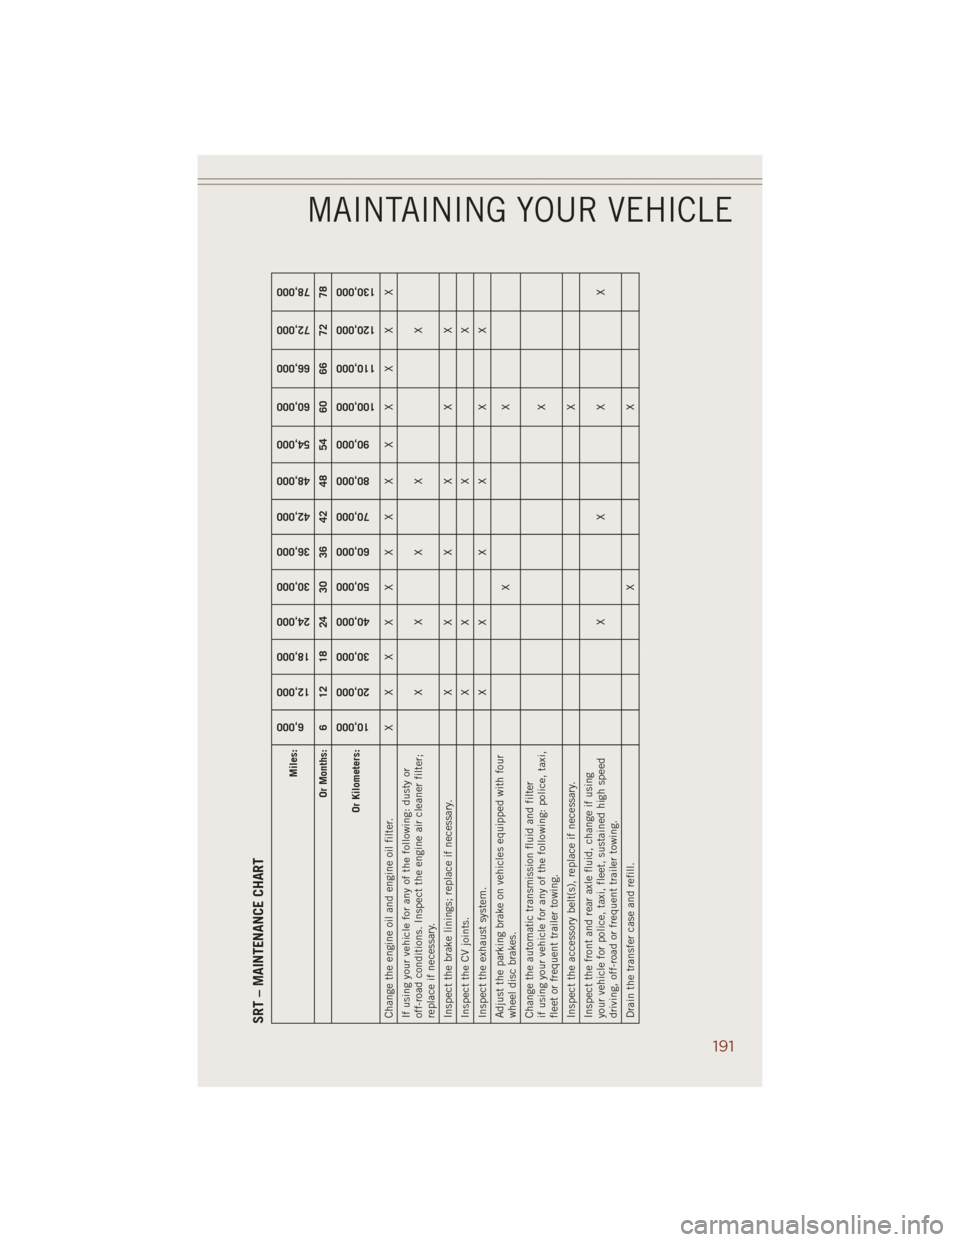 JEEP GRAND CHEROKEE 2014 WK2 / 4.G User Guide SRT – MAINTENANCE CHART
Miles:
6,000
12,000
18,000
24,000
30,000
36,000
42,000
48,000
54,000
60,000
66,000
72,000
78,000
Or Months: 6 12 18 24 30 36 42 48 54 60 66 72 78
Or Kilometers:
10,000
20,000